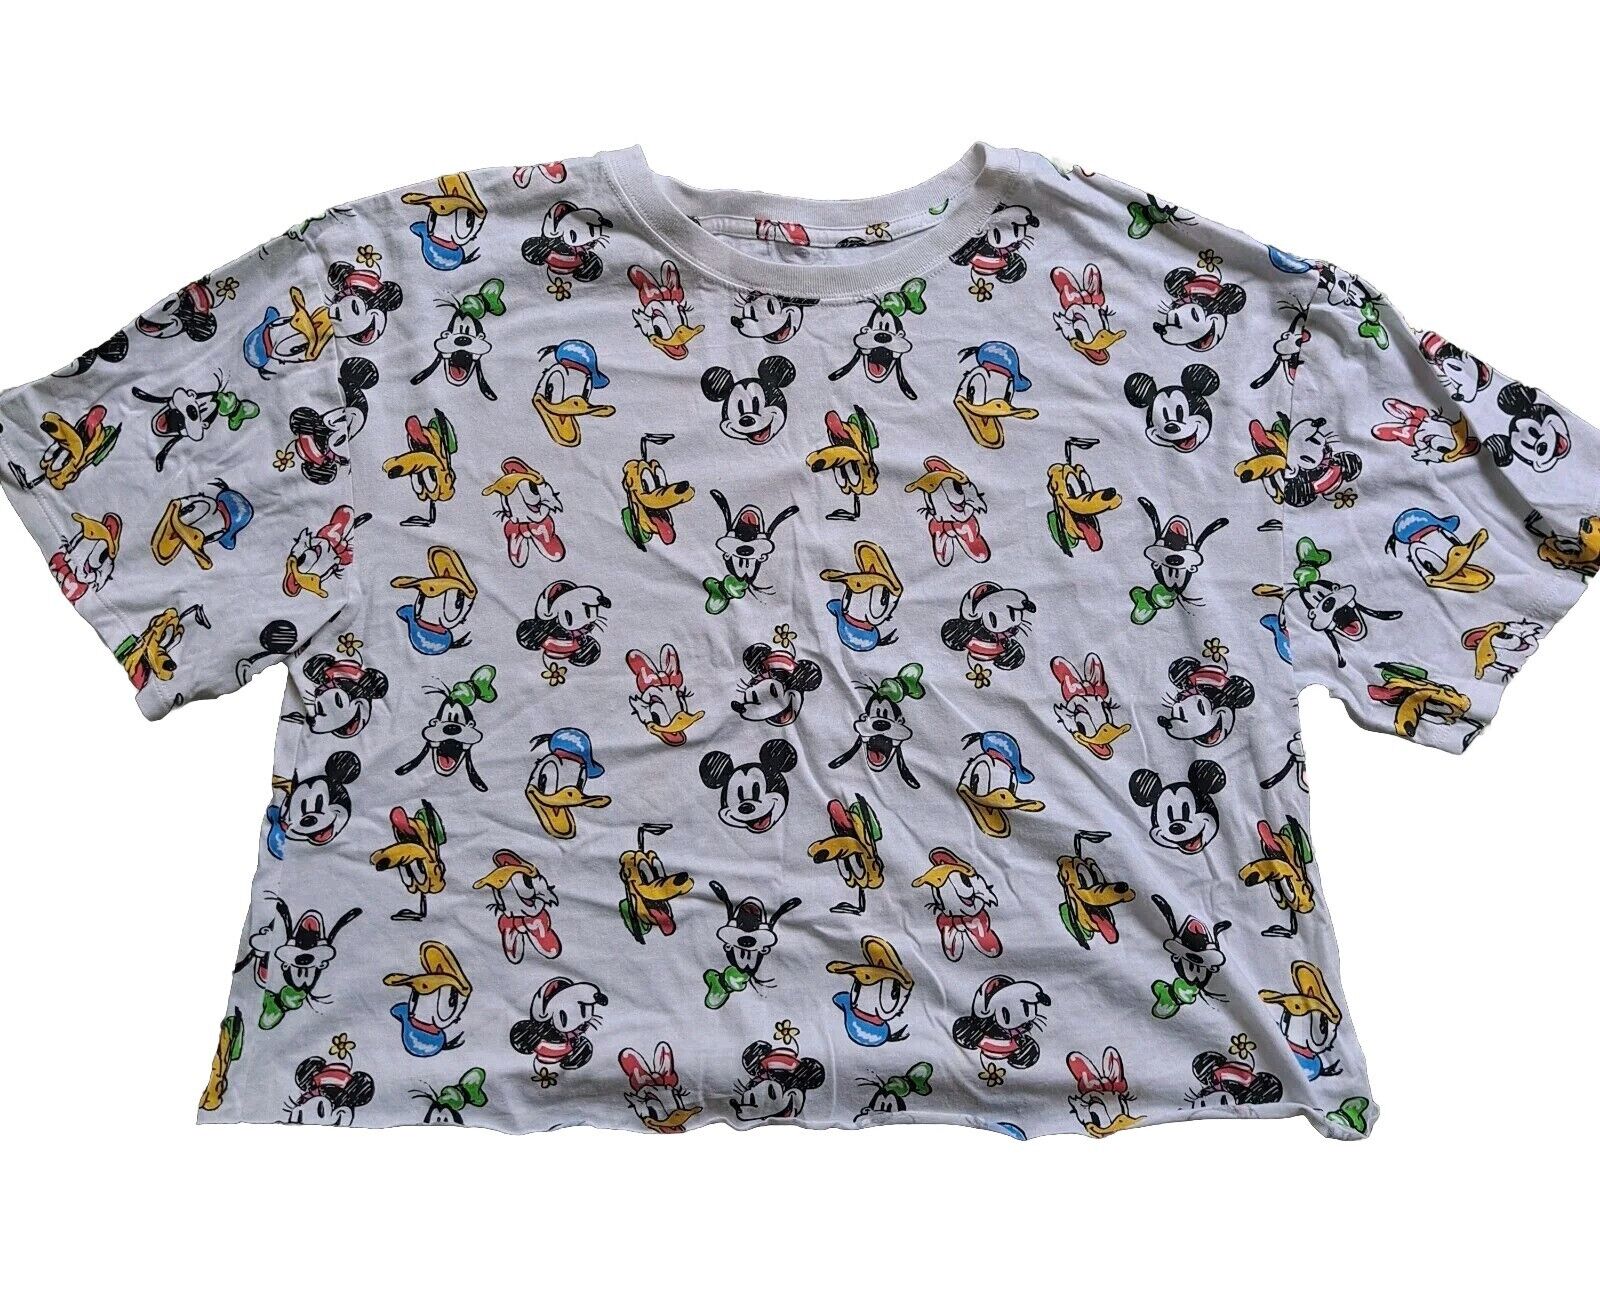 Disney Shirt Womens Large White Crop Top Mickey & Friends All Over Print Tee NEW